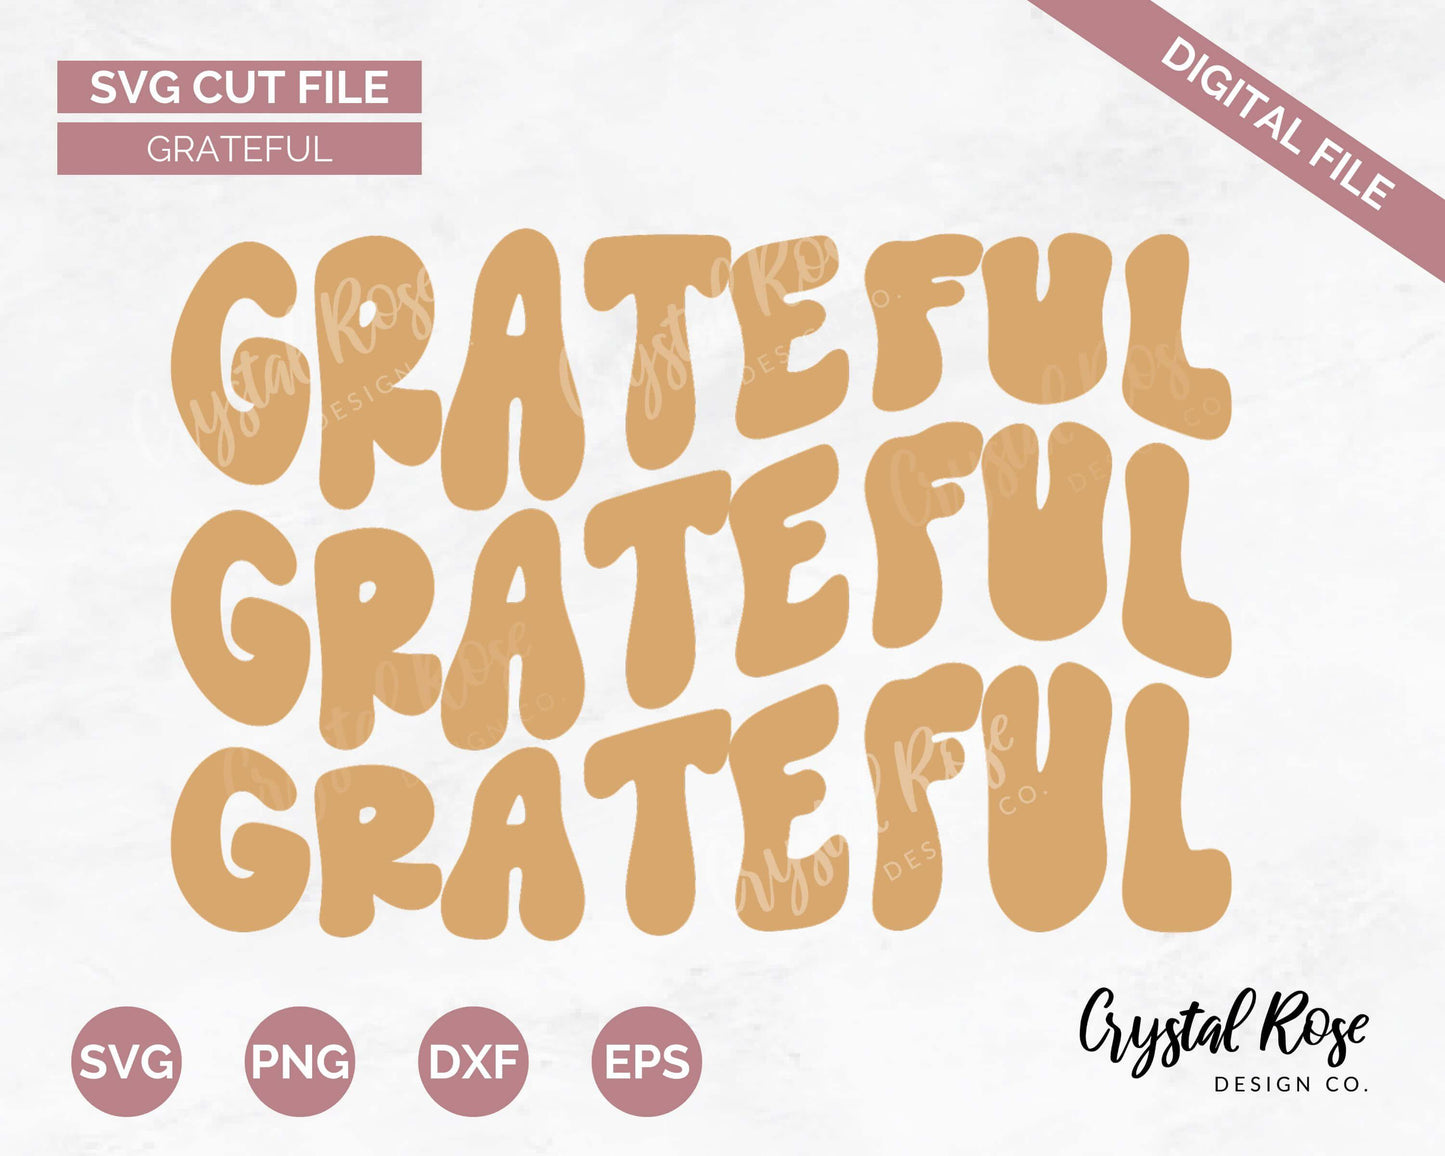 Grateful SVG, Fall SVG, Digital Download, Cricut, Silhouette, Glowforge (includes svg/png/dxf/eps)